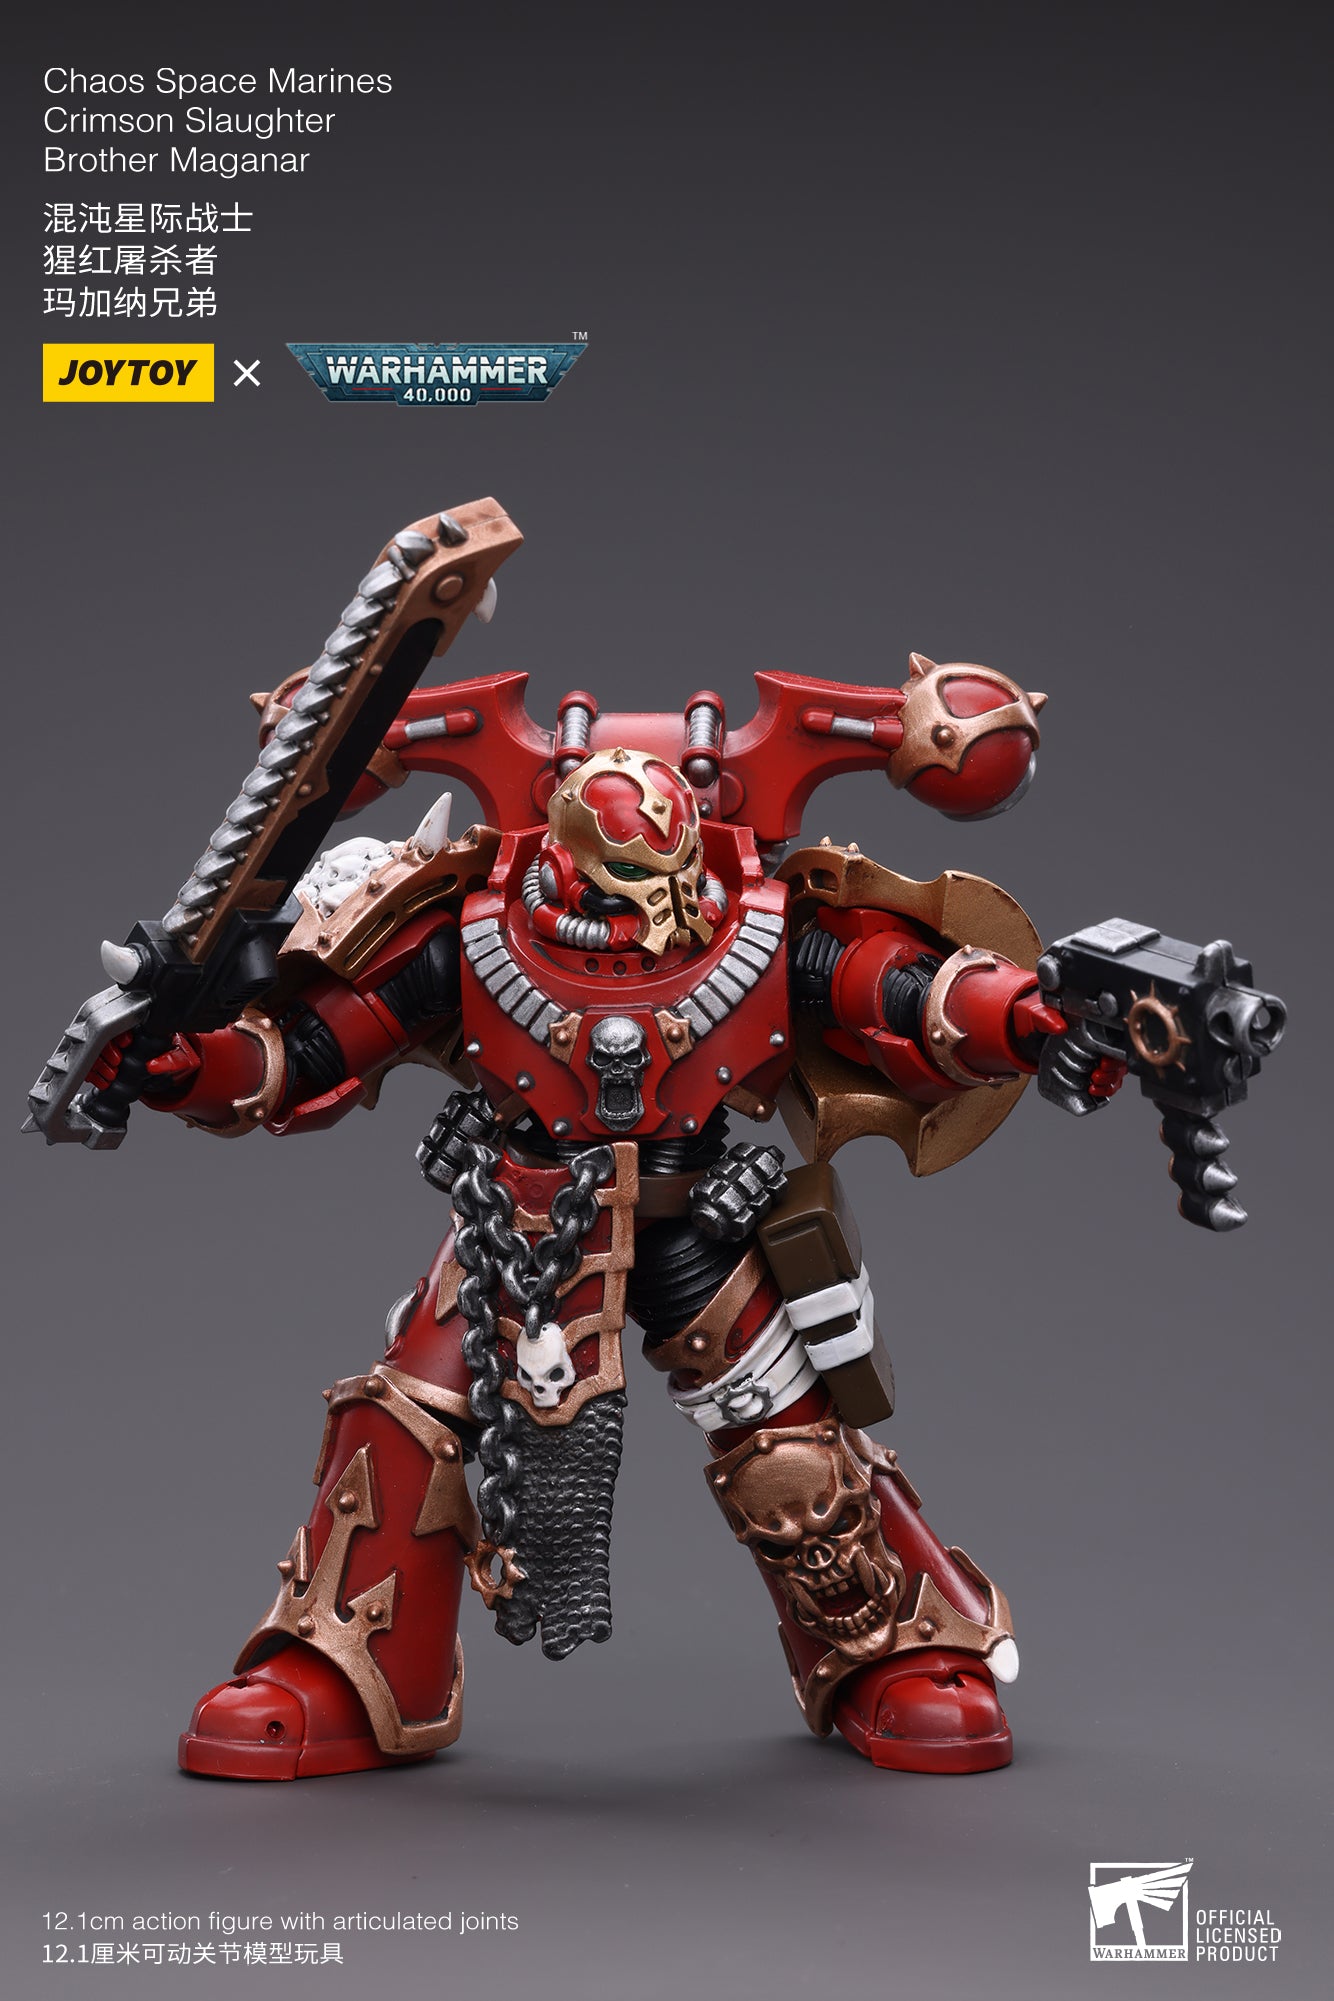 Joy Toy brings Chaos Space Marines Crimson Slaughter 1/18 scale figures. JoyToy each figure includes interchangeable hands and weapon accessories and stands between 4" and 6" tall.